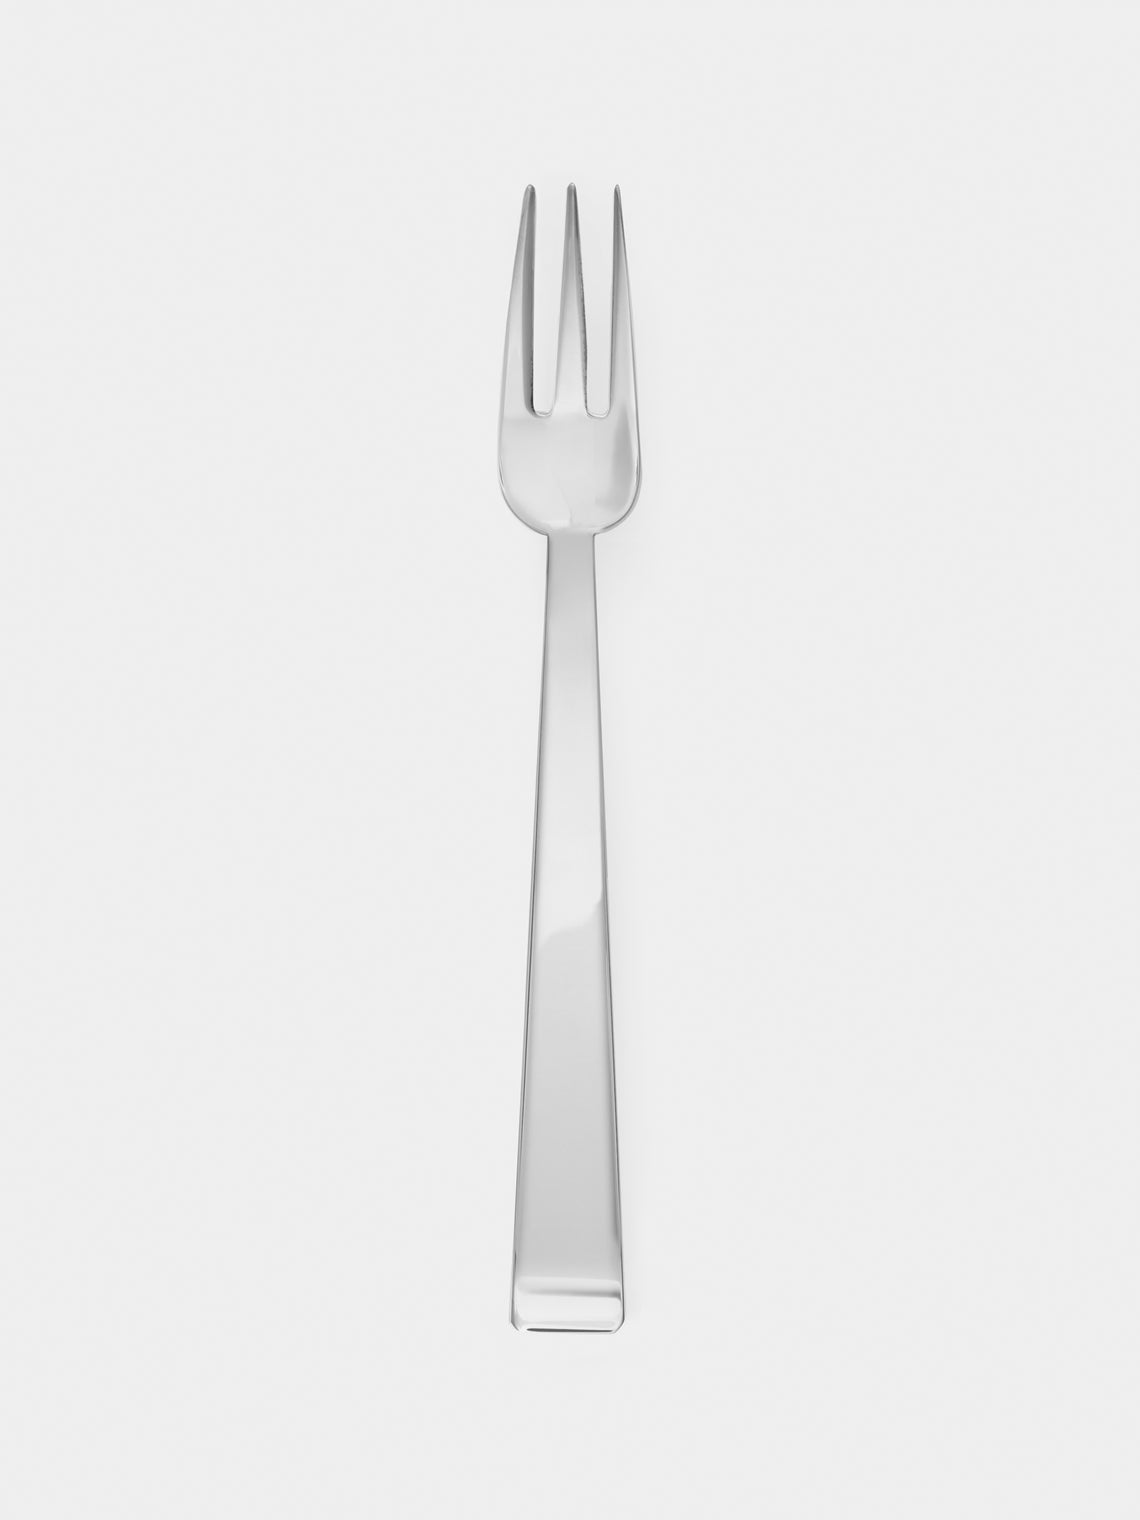 Wiener Silber Manufactur - Josef Hoffmann 135 Silver-Plated Pastry Fork - Silver - ABASK - 